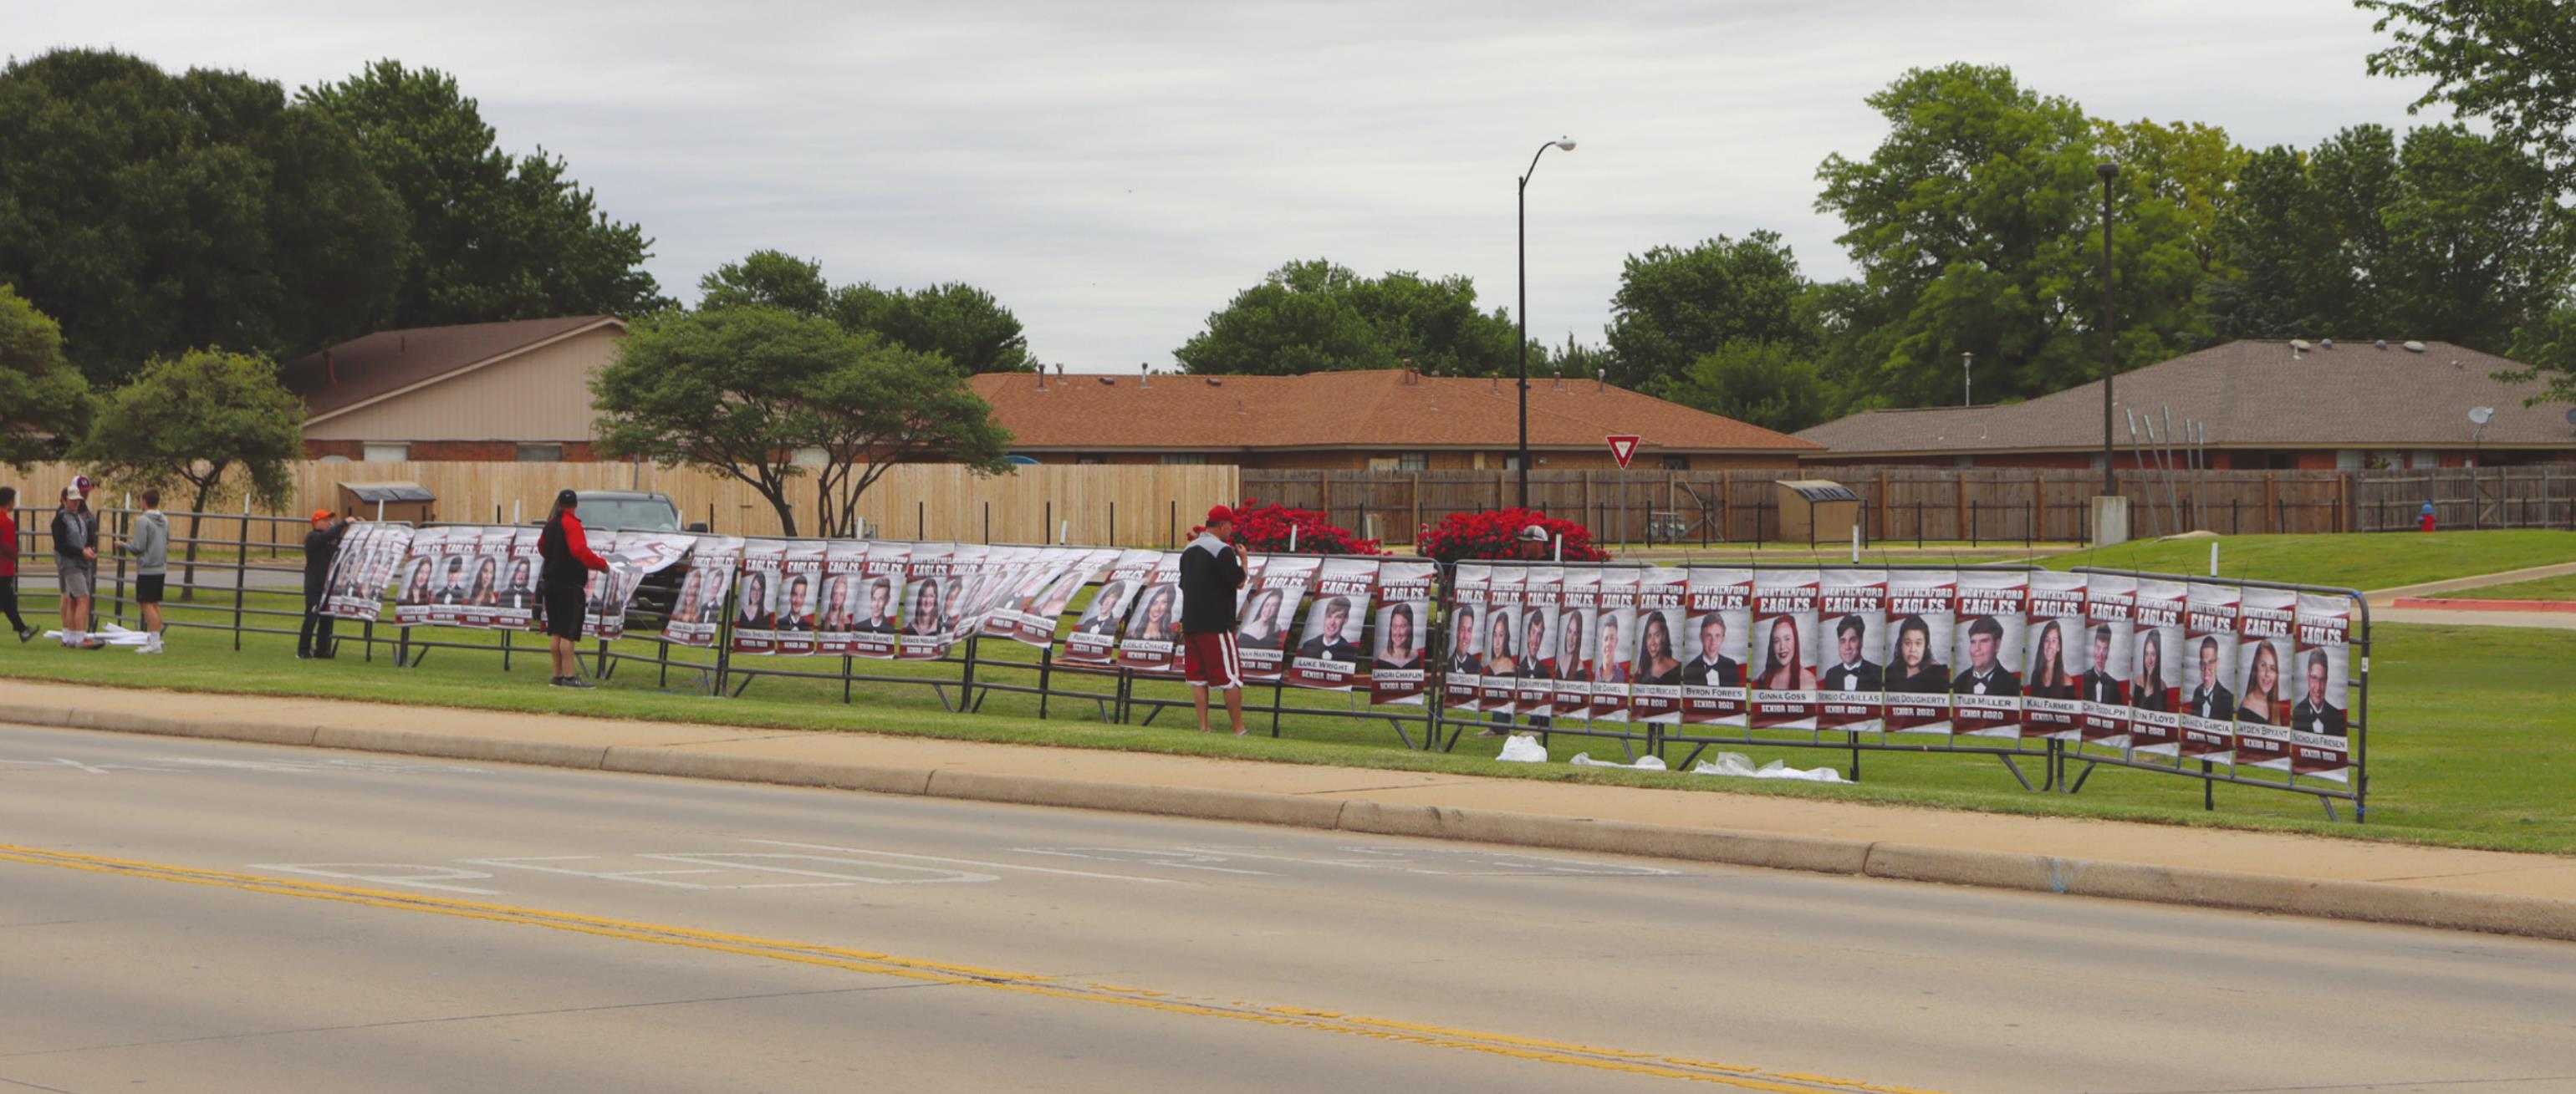 Due to COVID-19 and the cancellation of the end of the school year, Weatherford High School put up banners in front of the Performing Arts Center to honor the Weatherford High School Class of 2020 seniors. Leanna Cook/WDN